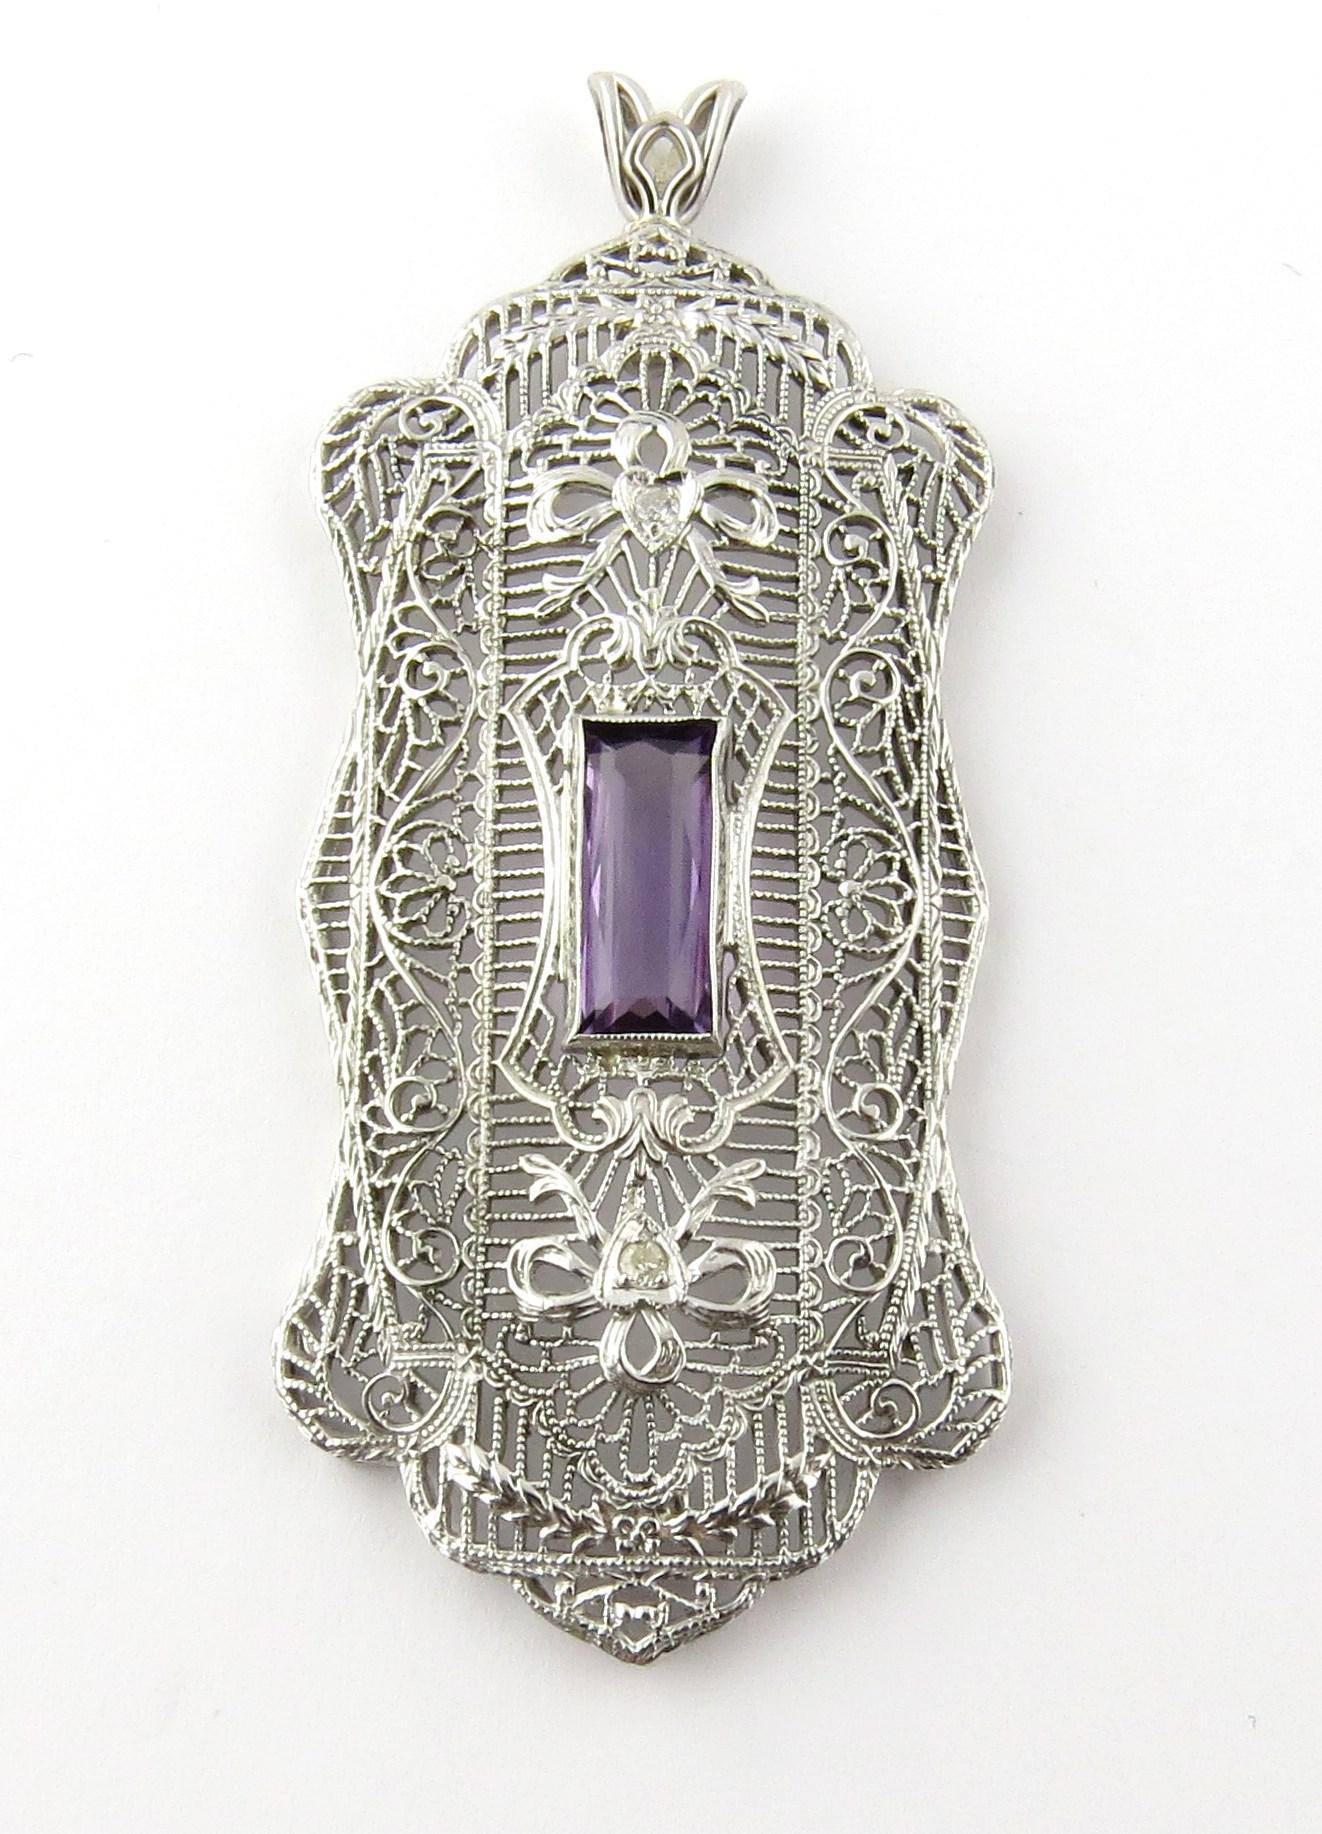 Vintage 14K White Gold Genuine Amethyst and Diamond Filigree Pendant 

This large elegantly detailed pendant is set with a rectangular amethyst stone. The stone is in excellent condition and approximately 11/16